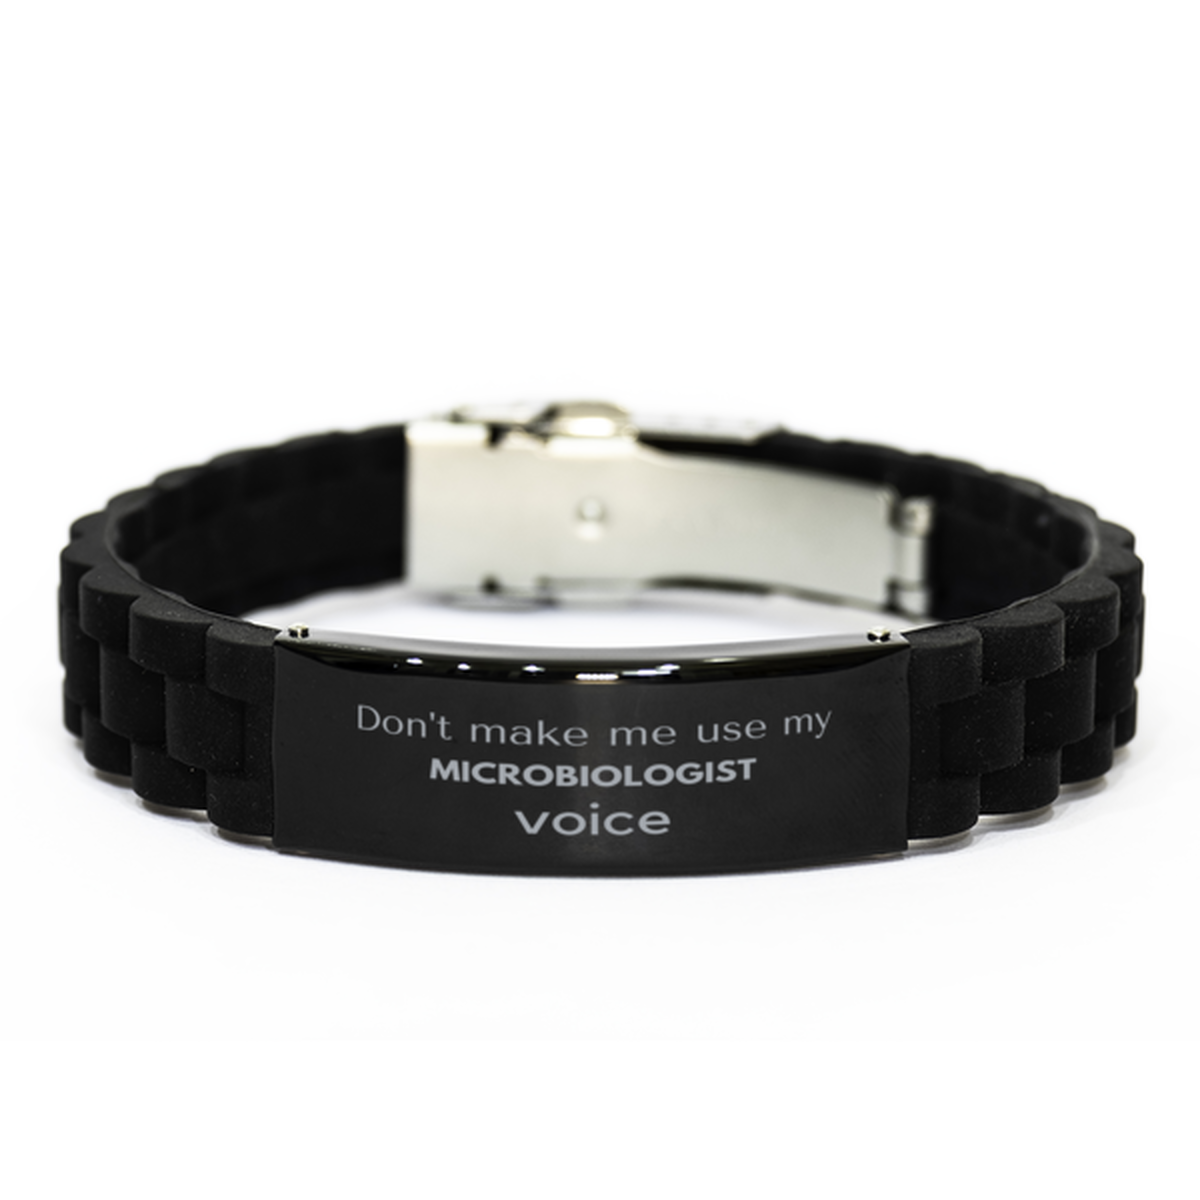 Don't make me use my Microbiologist voice, Sarcasm Microbiologist Gifts, Christmas Microbiologist Black Glidelock Clasp Bracelet Birthday Unique Gifts For Microbiologist Coworkers, Men, Women, Colleague, Friends